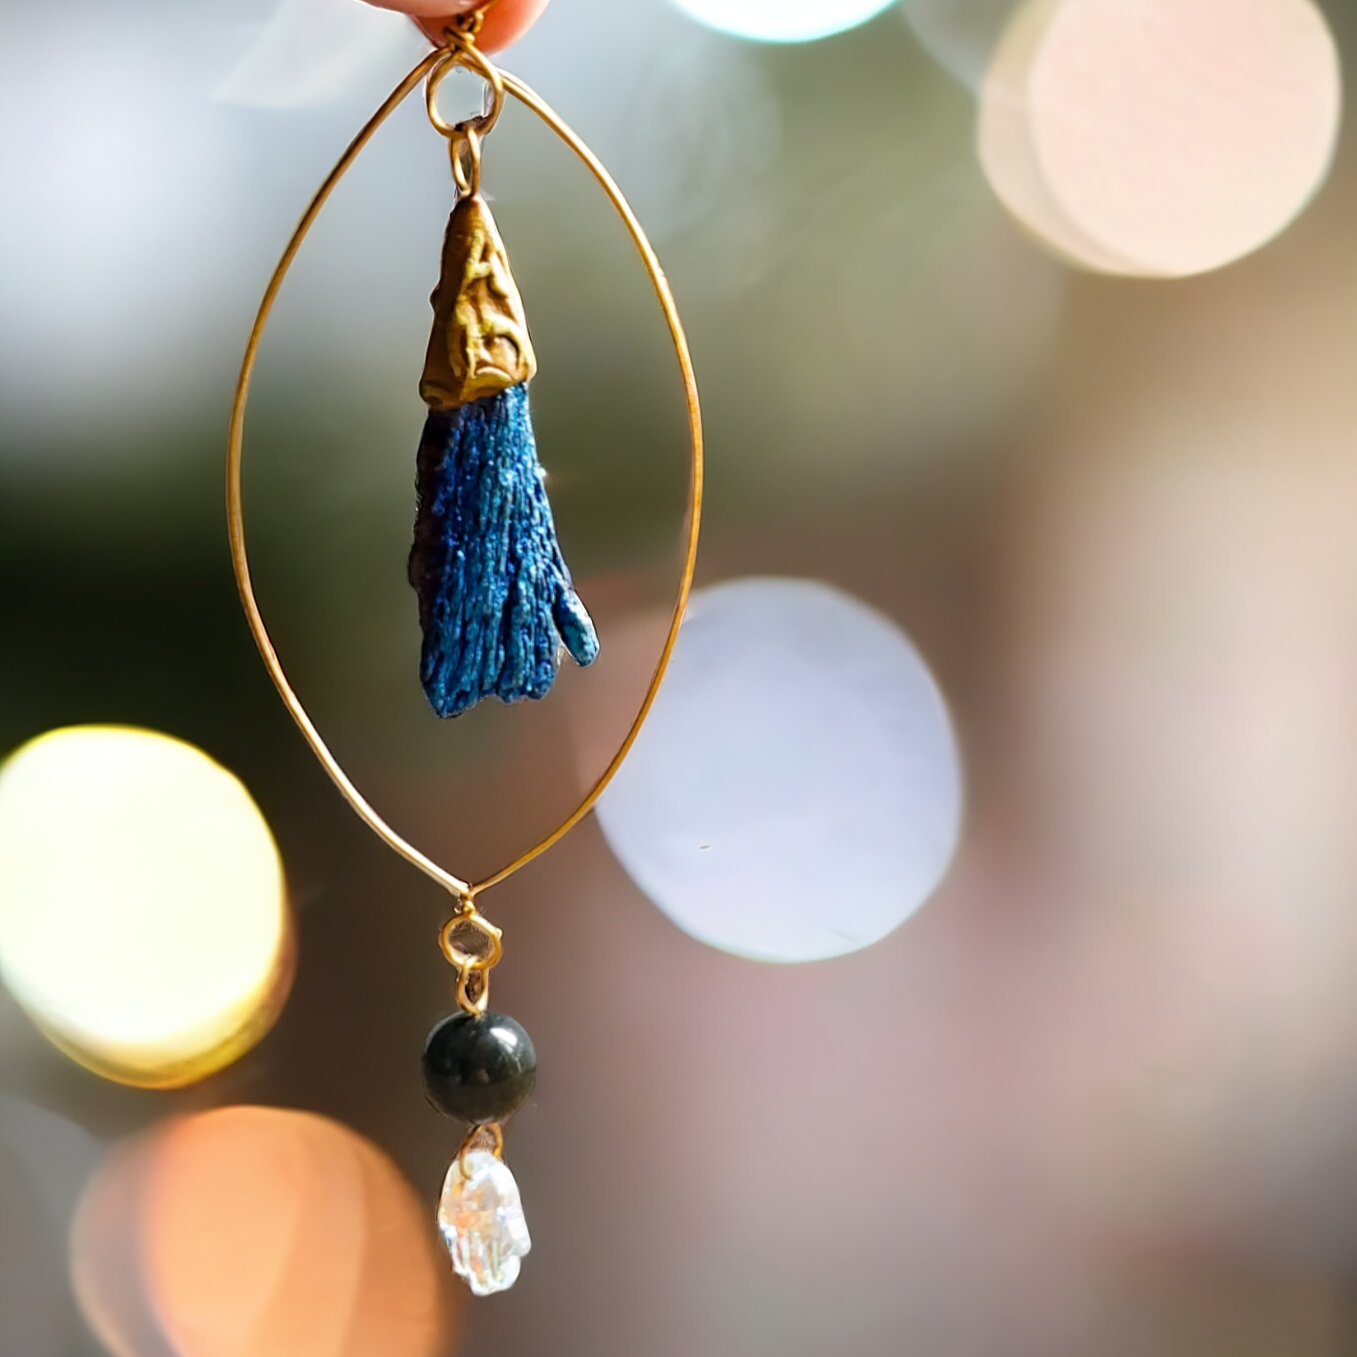 Crystal Suncatcher with hammered wire eye design, featuring an aura-coated Black Kyanite fan set in detailed brown polymer clay. Dangling elements include a Gold Sheen Obsidian bead and a glass crystal Hamsa Hand. Approximately 5.5 inches long, designed for protection and witchy decor near the front door. Powerful symbolism with crystals for protection and enchanting aesthetics.